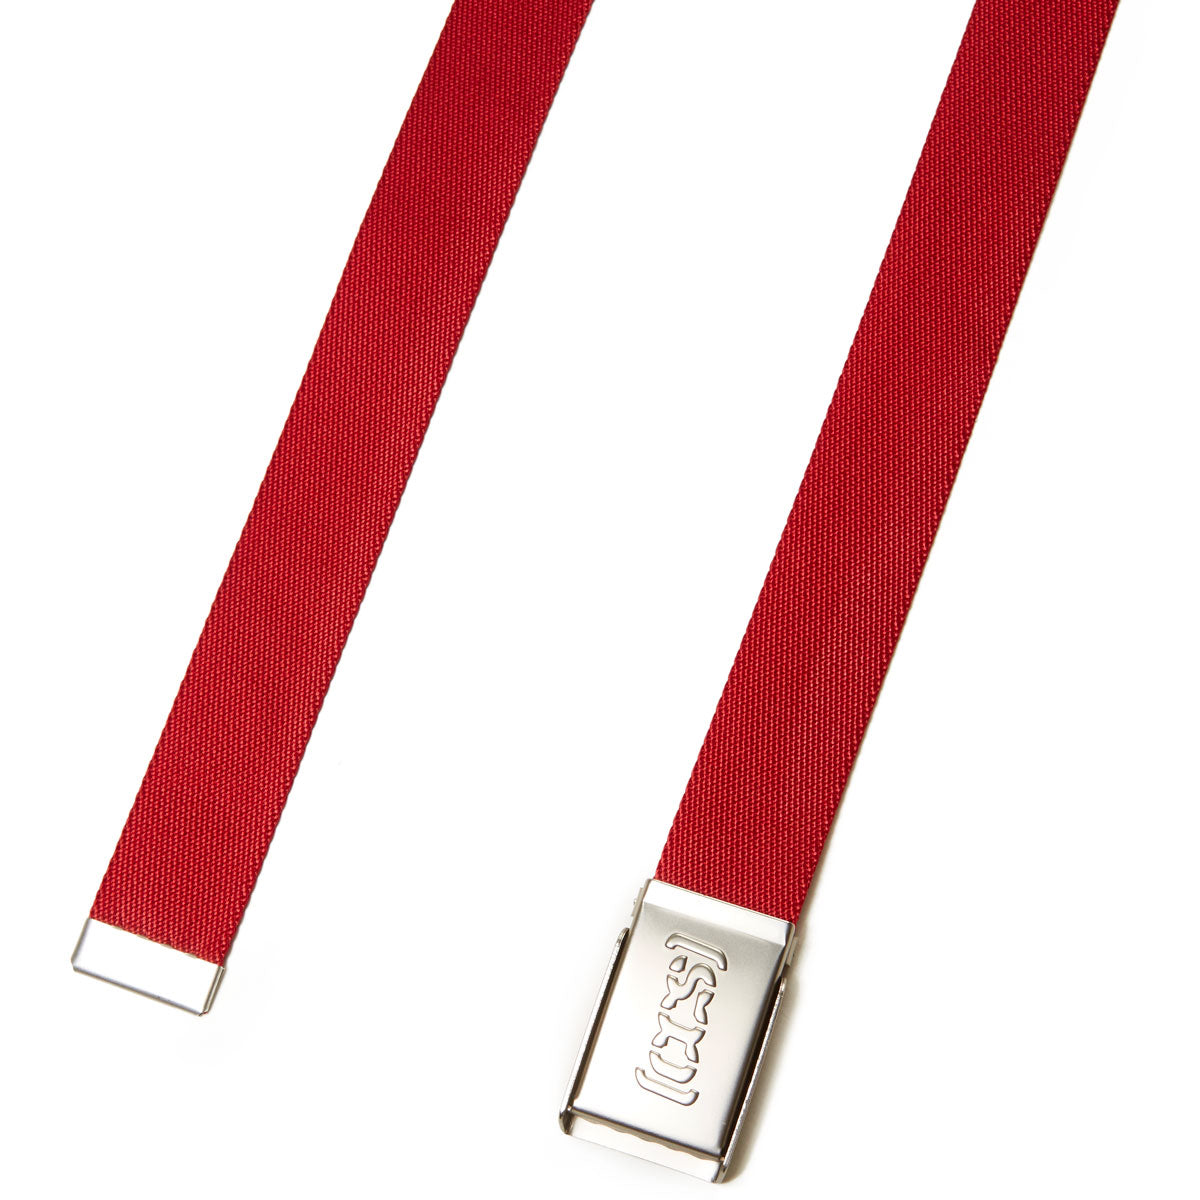 CCS Silver Logo Buckle Belt - Red image 2